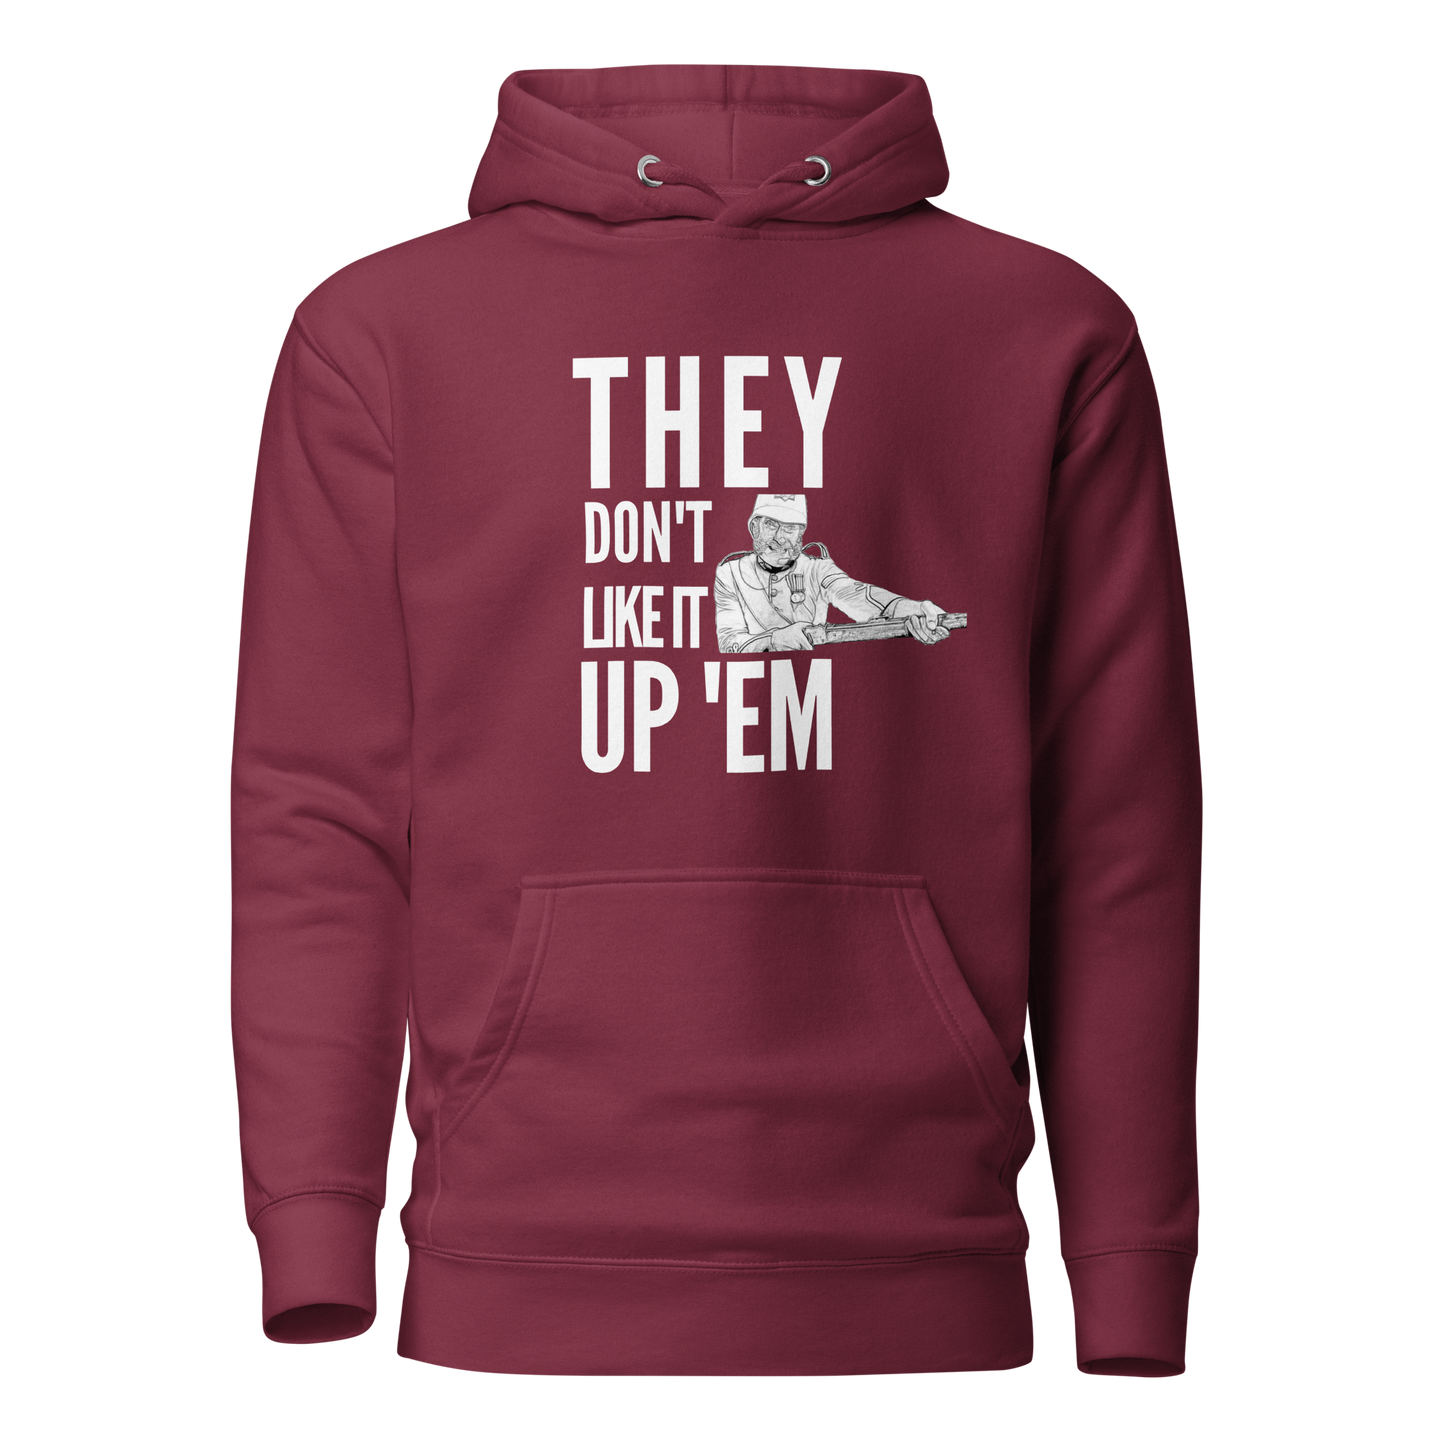 They Don't Like It Up 'Em (Premium Hoodie)